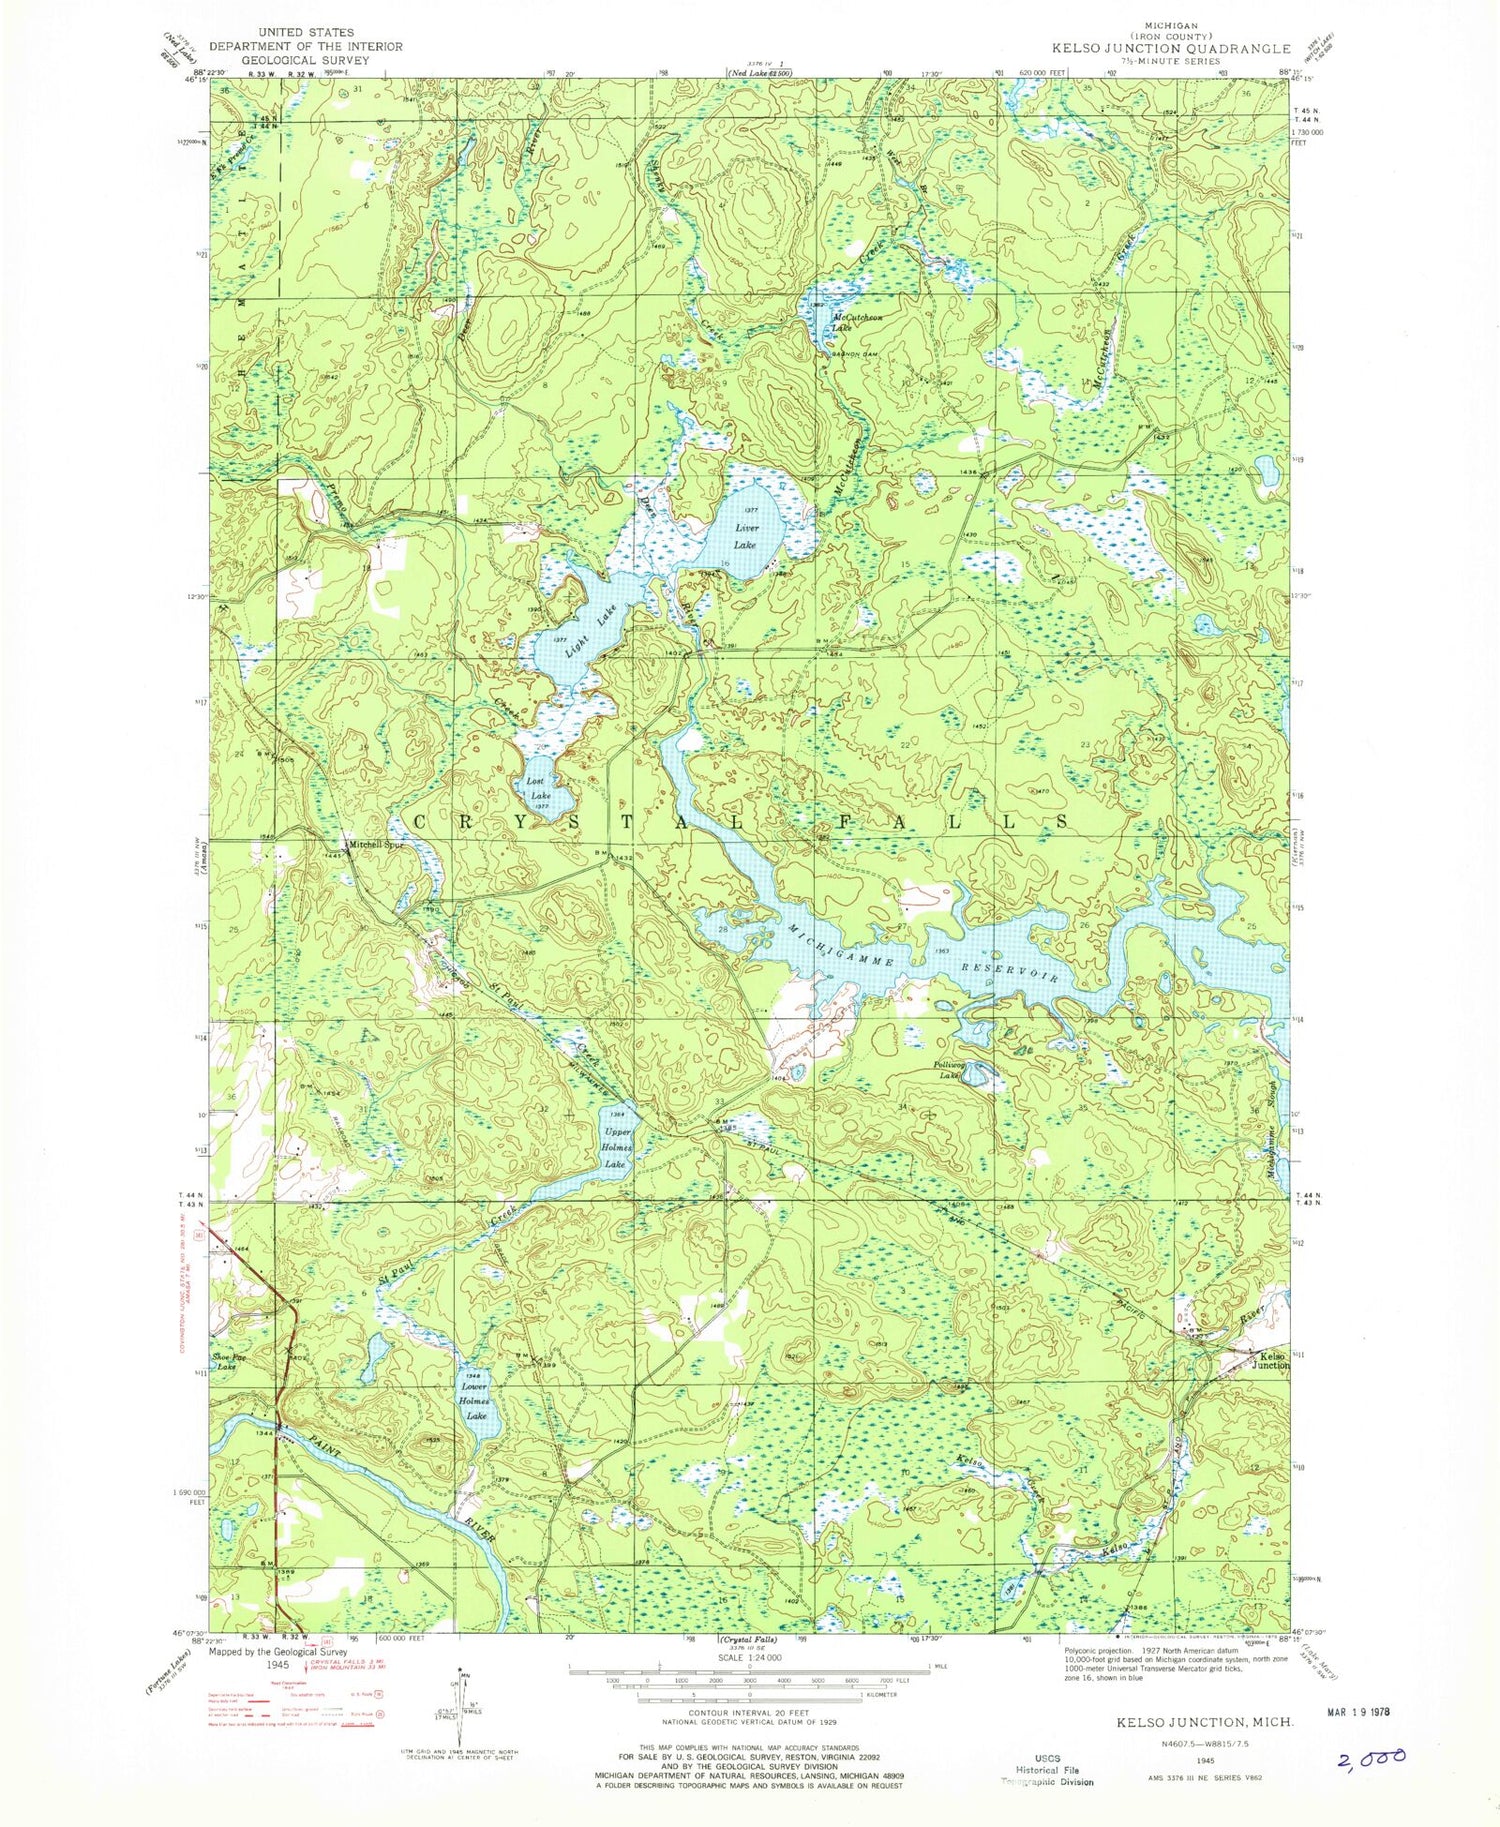 Classic USGS Kelso Junction Michigan 7.5'x7.5' Topo Map Image